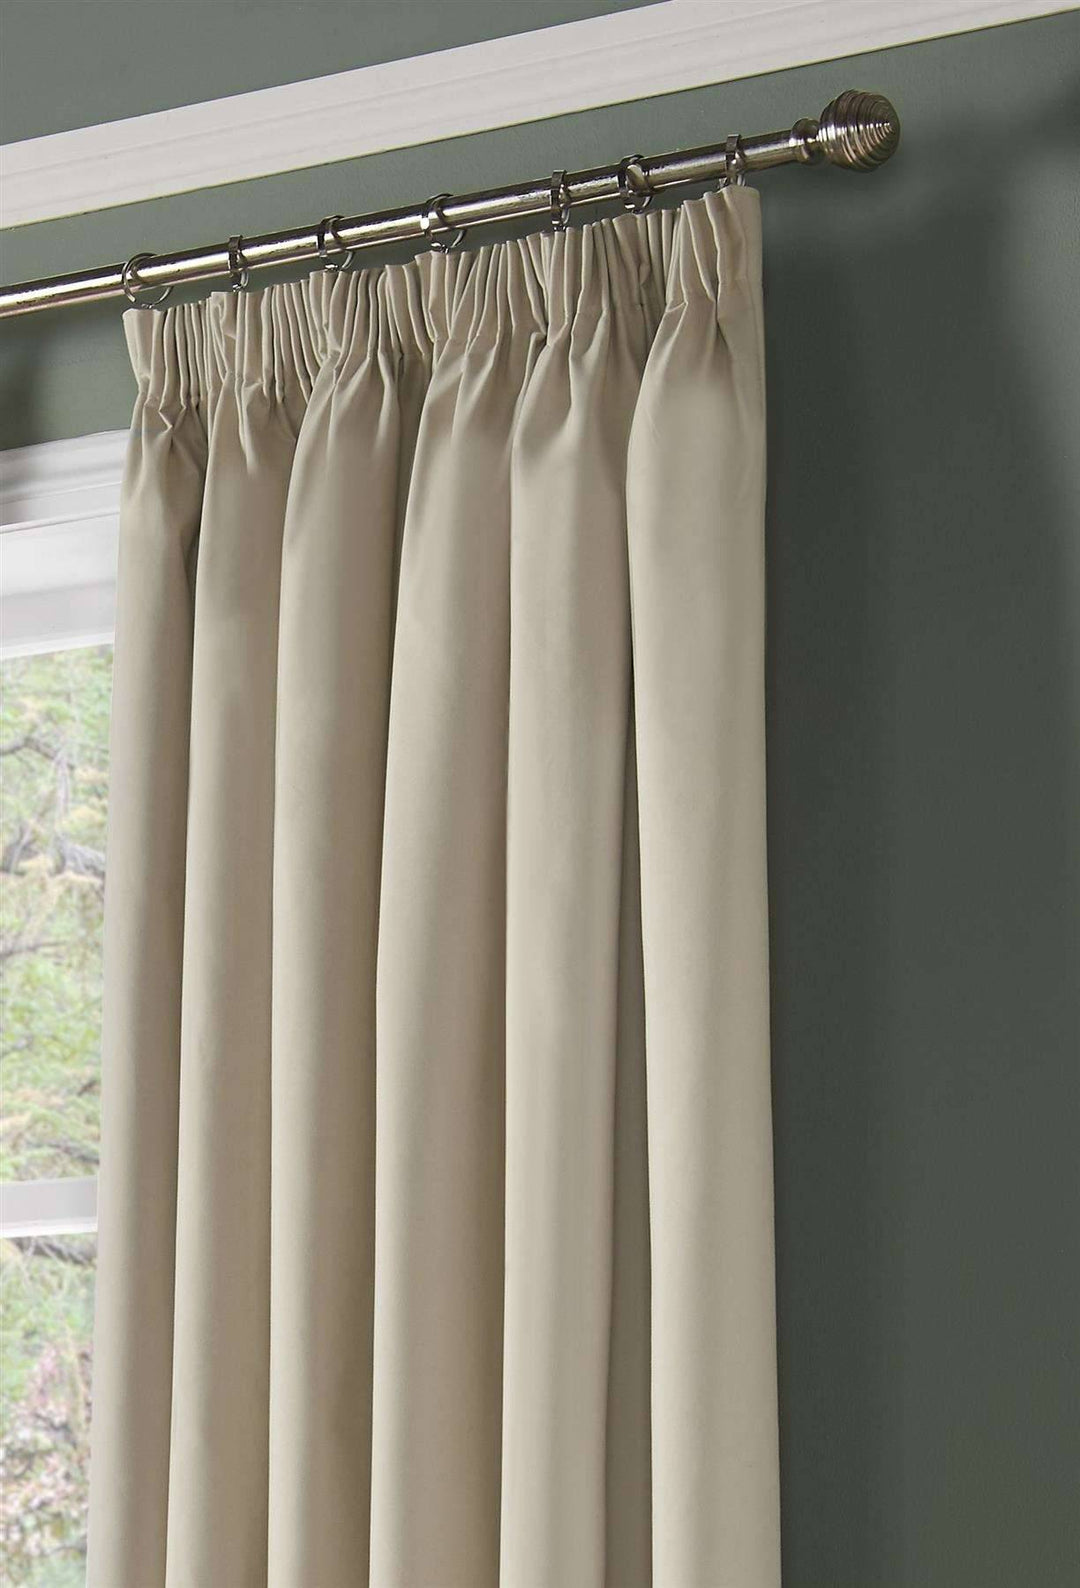 100% Blackout (Taped Top Curtains) - TidySpaces